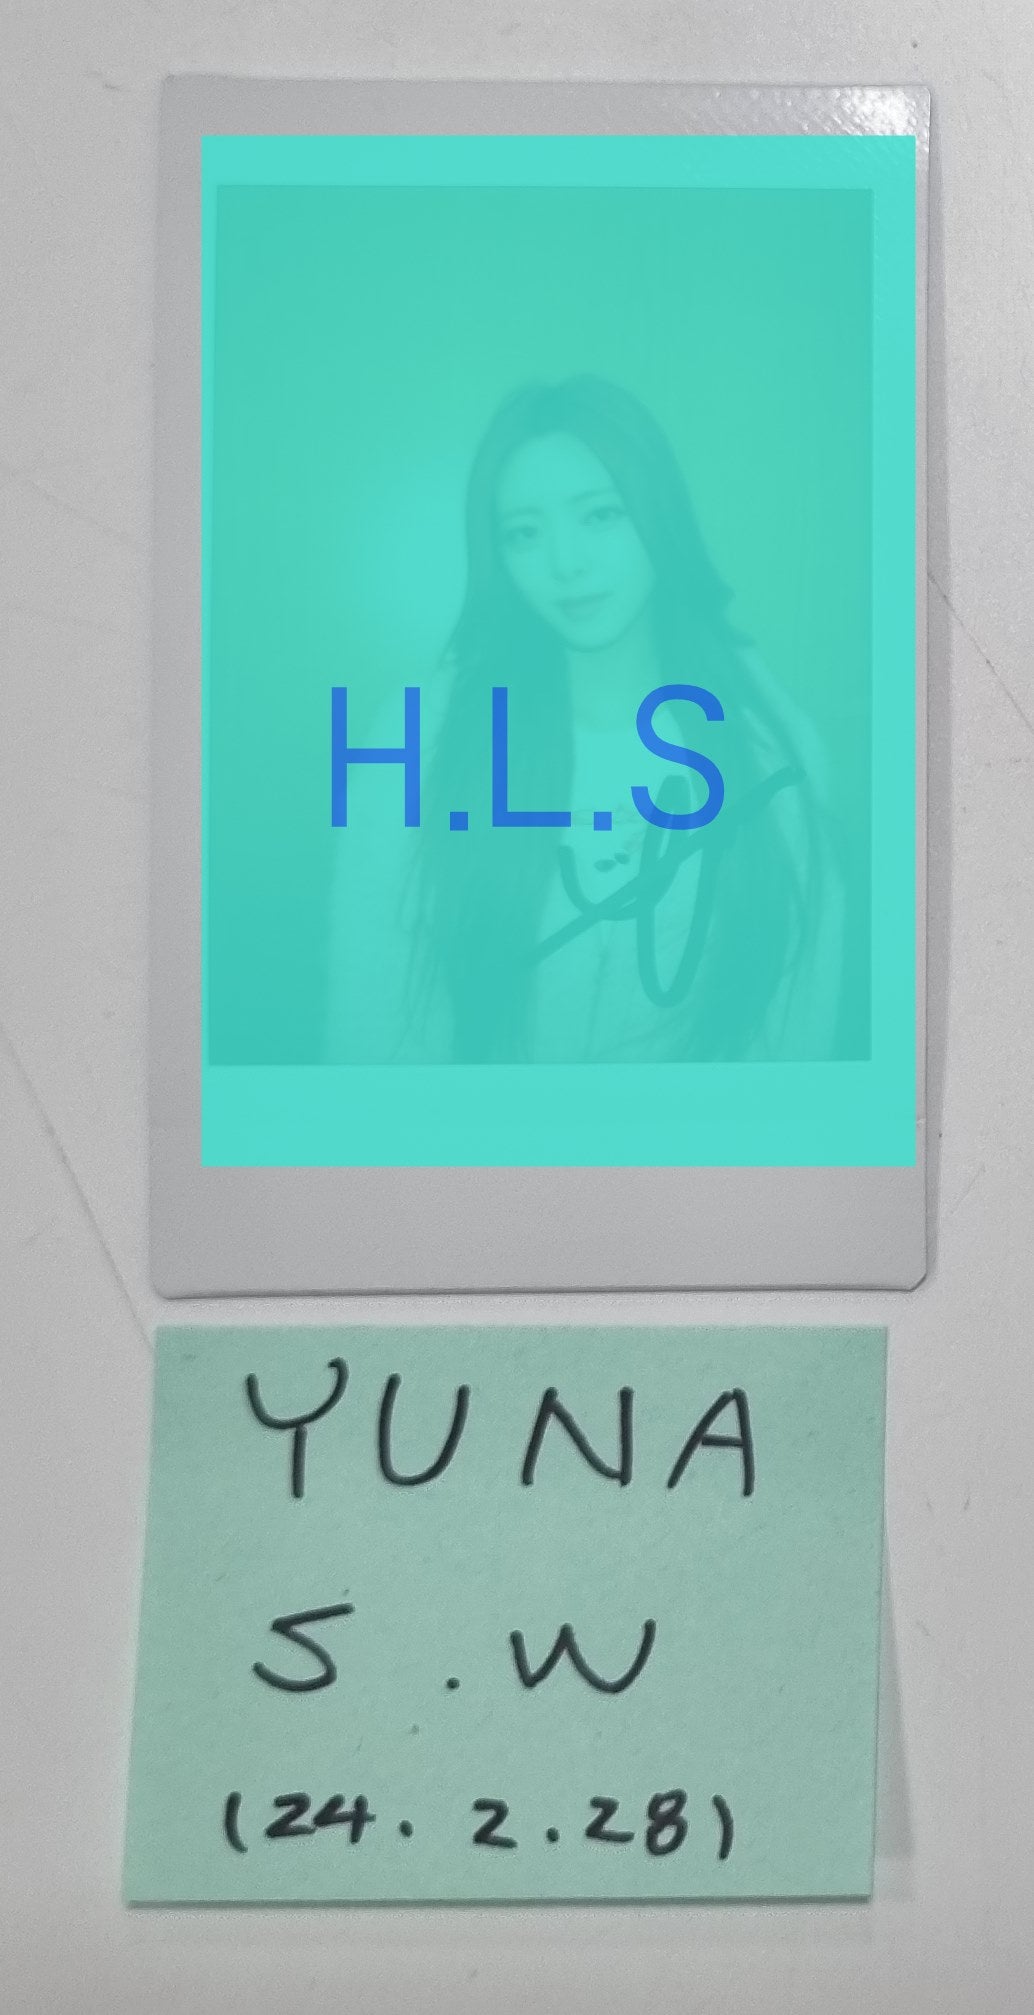 Yuna (Of ITZY) 'BORN TO BE' - Hand Autographed(Signed) Polaroid [24.2.28]